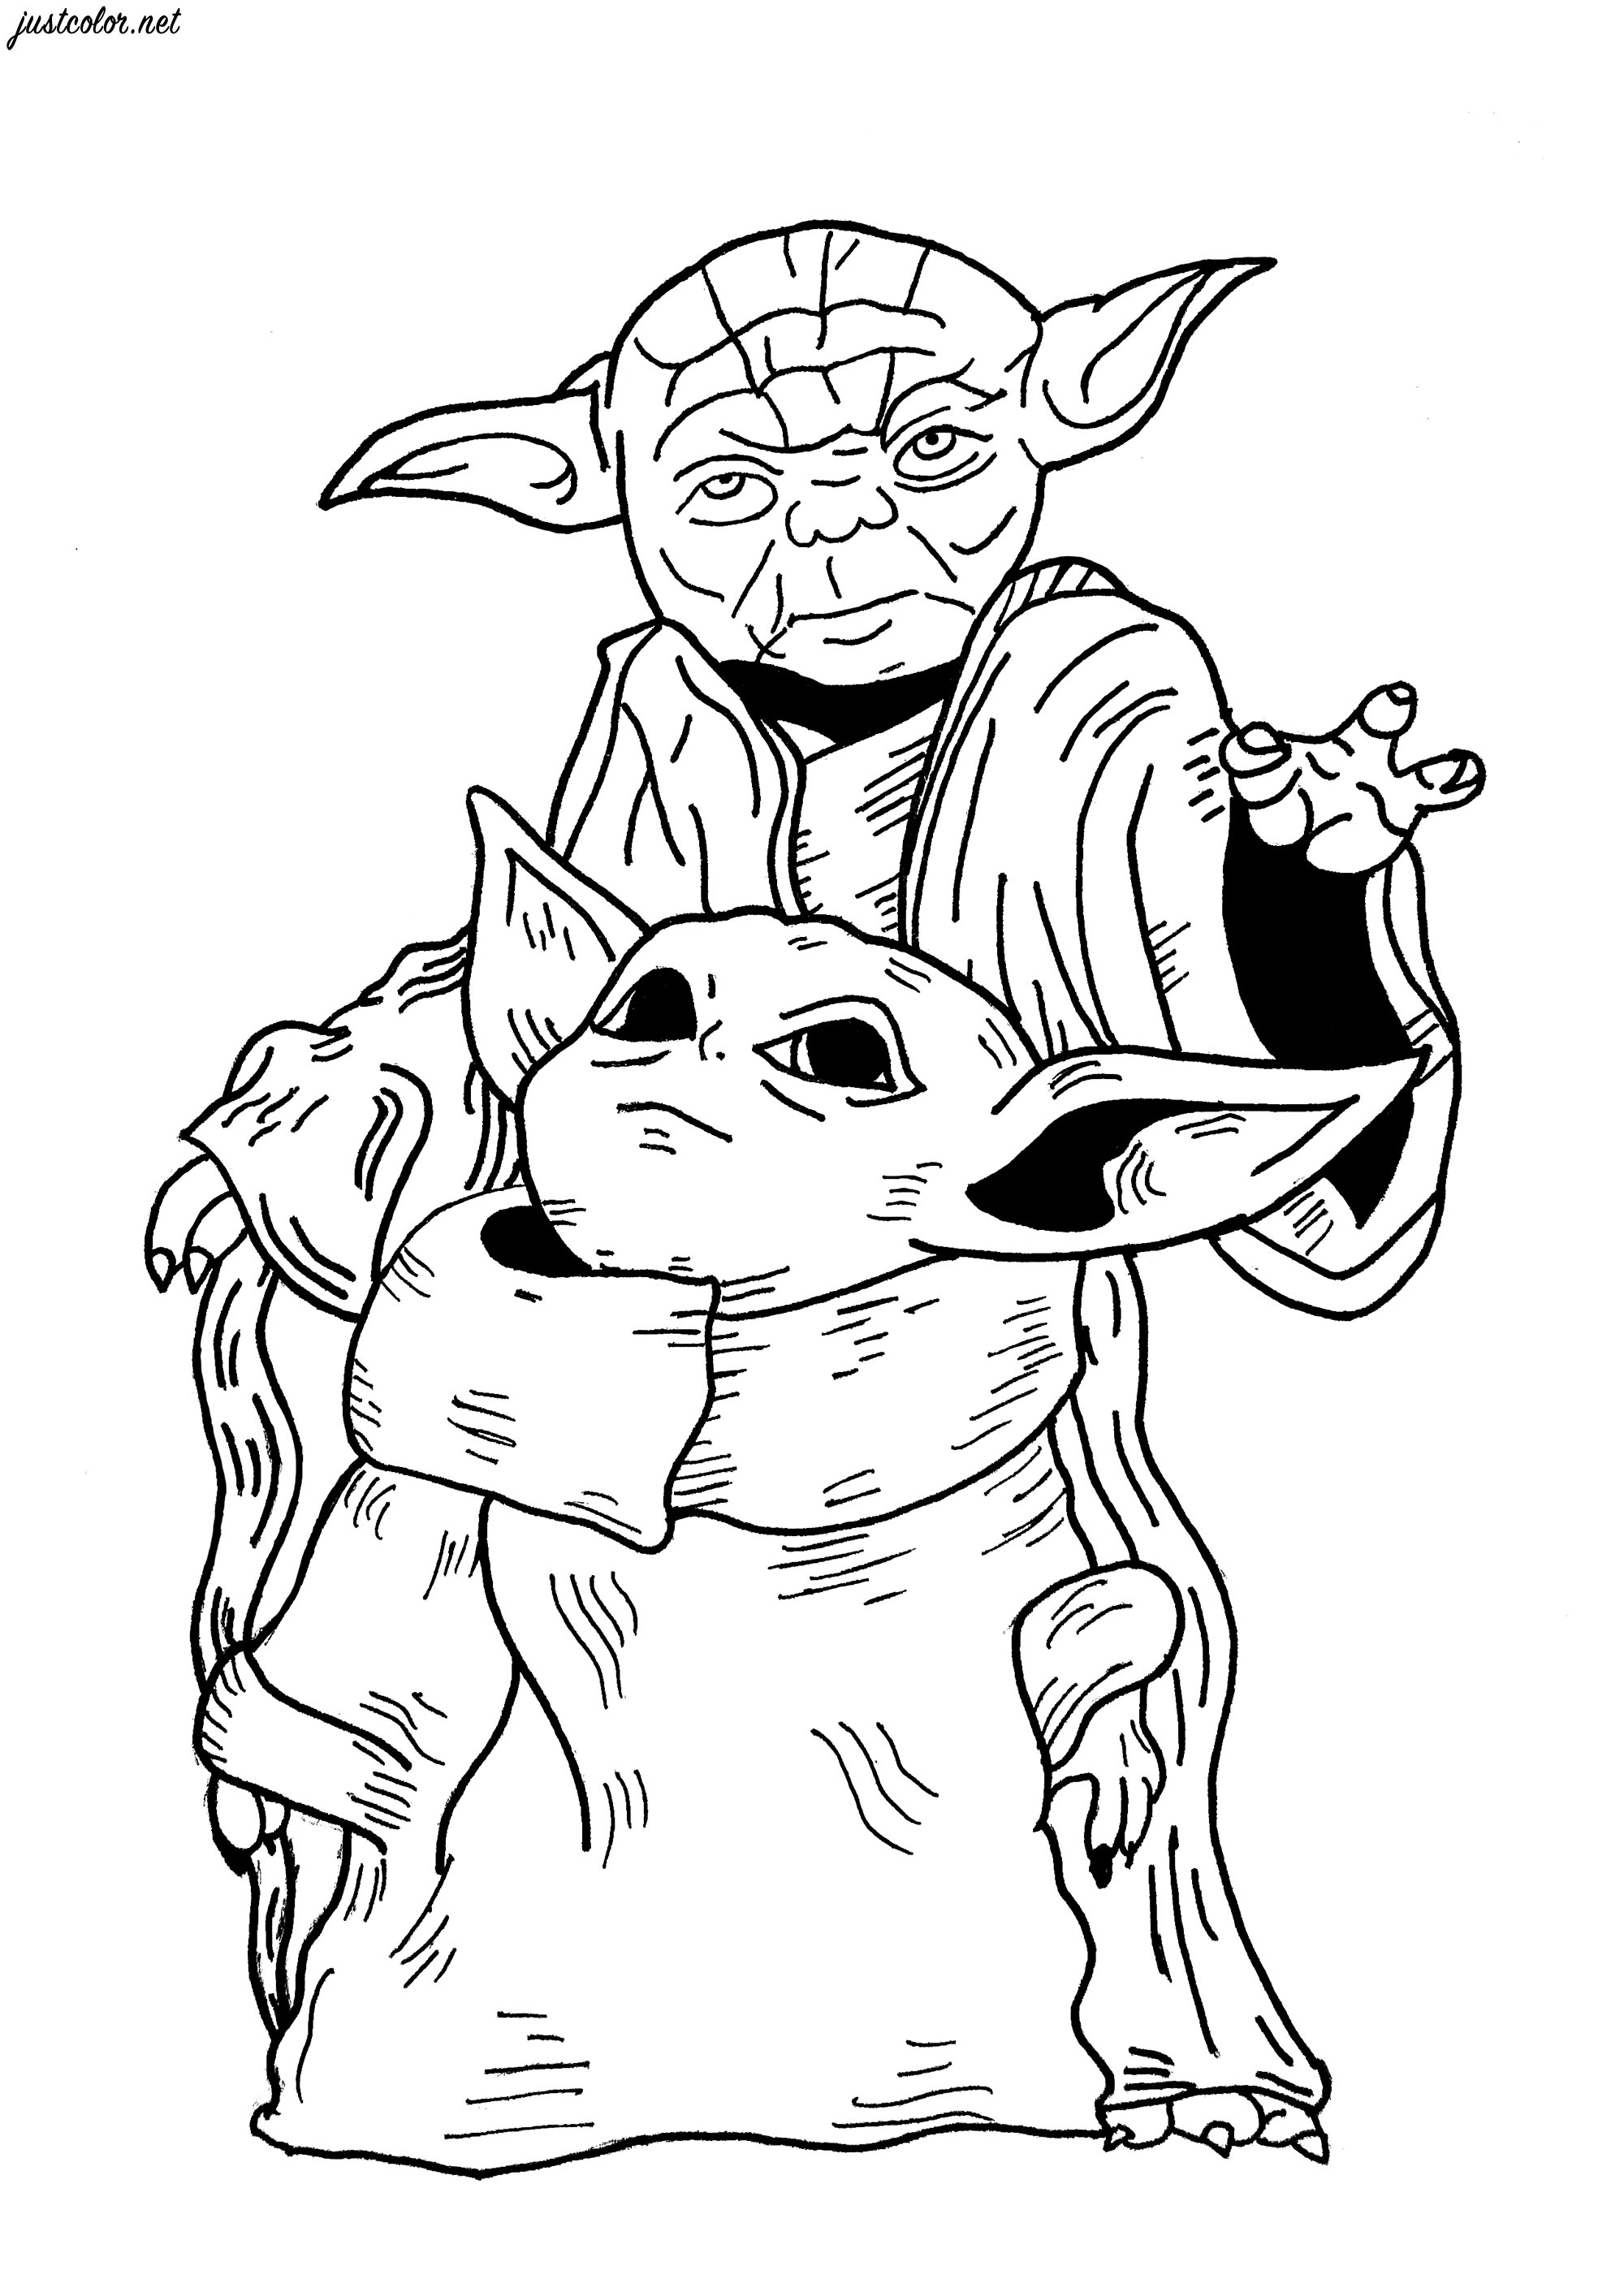 Download Baby Yoda Coloring Pages - colouring mermaid